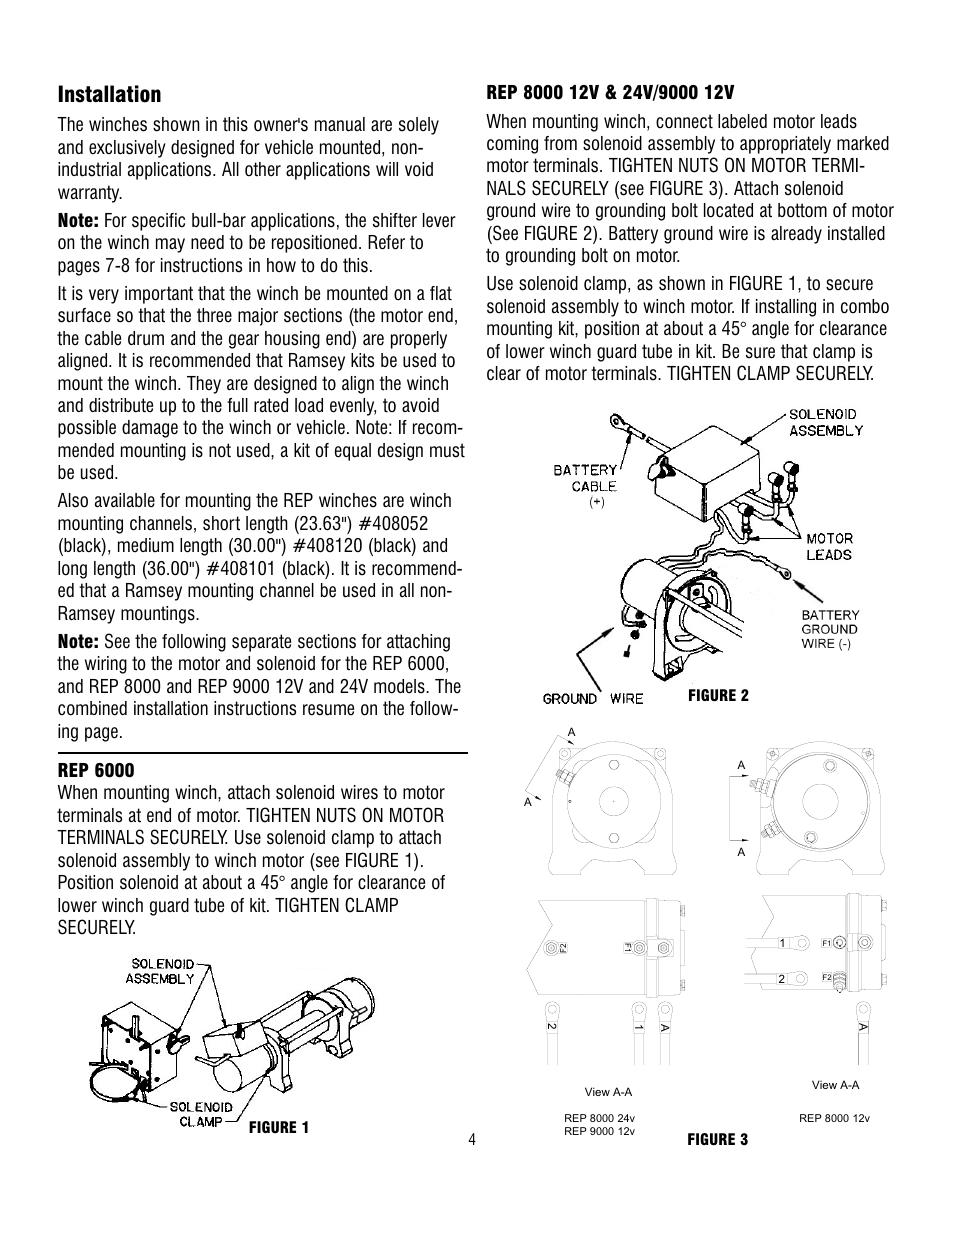 Installation | Ramsey Winch REP-6000/8000/9000 CURRENT User Manual